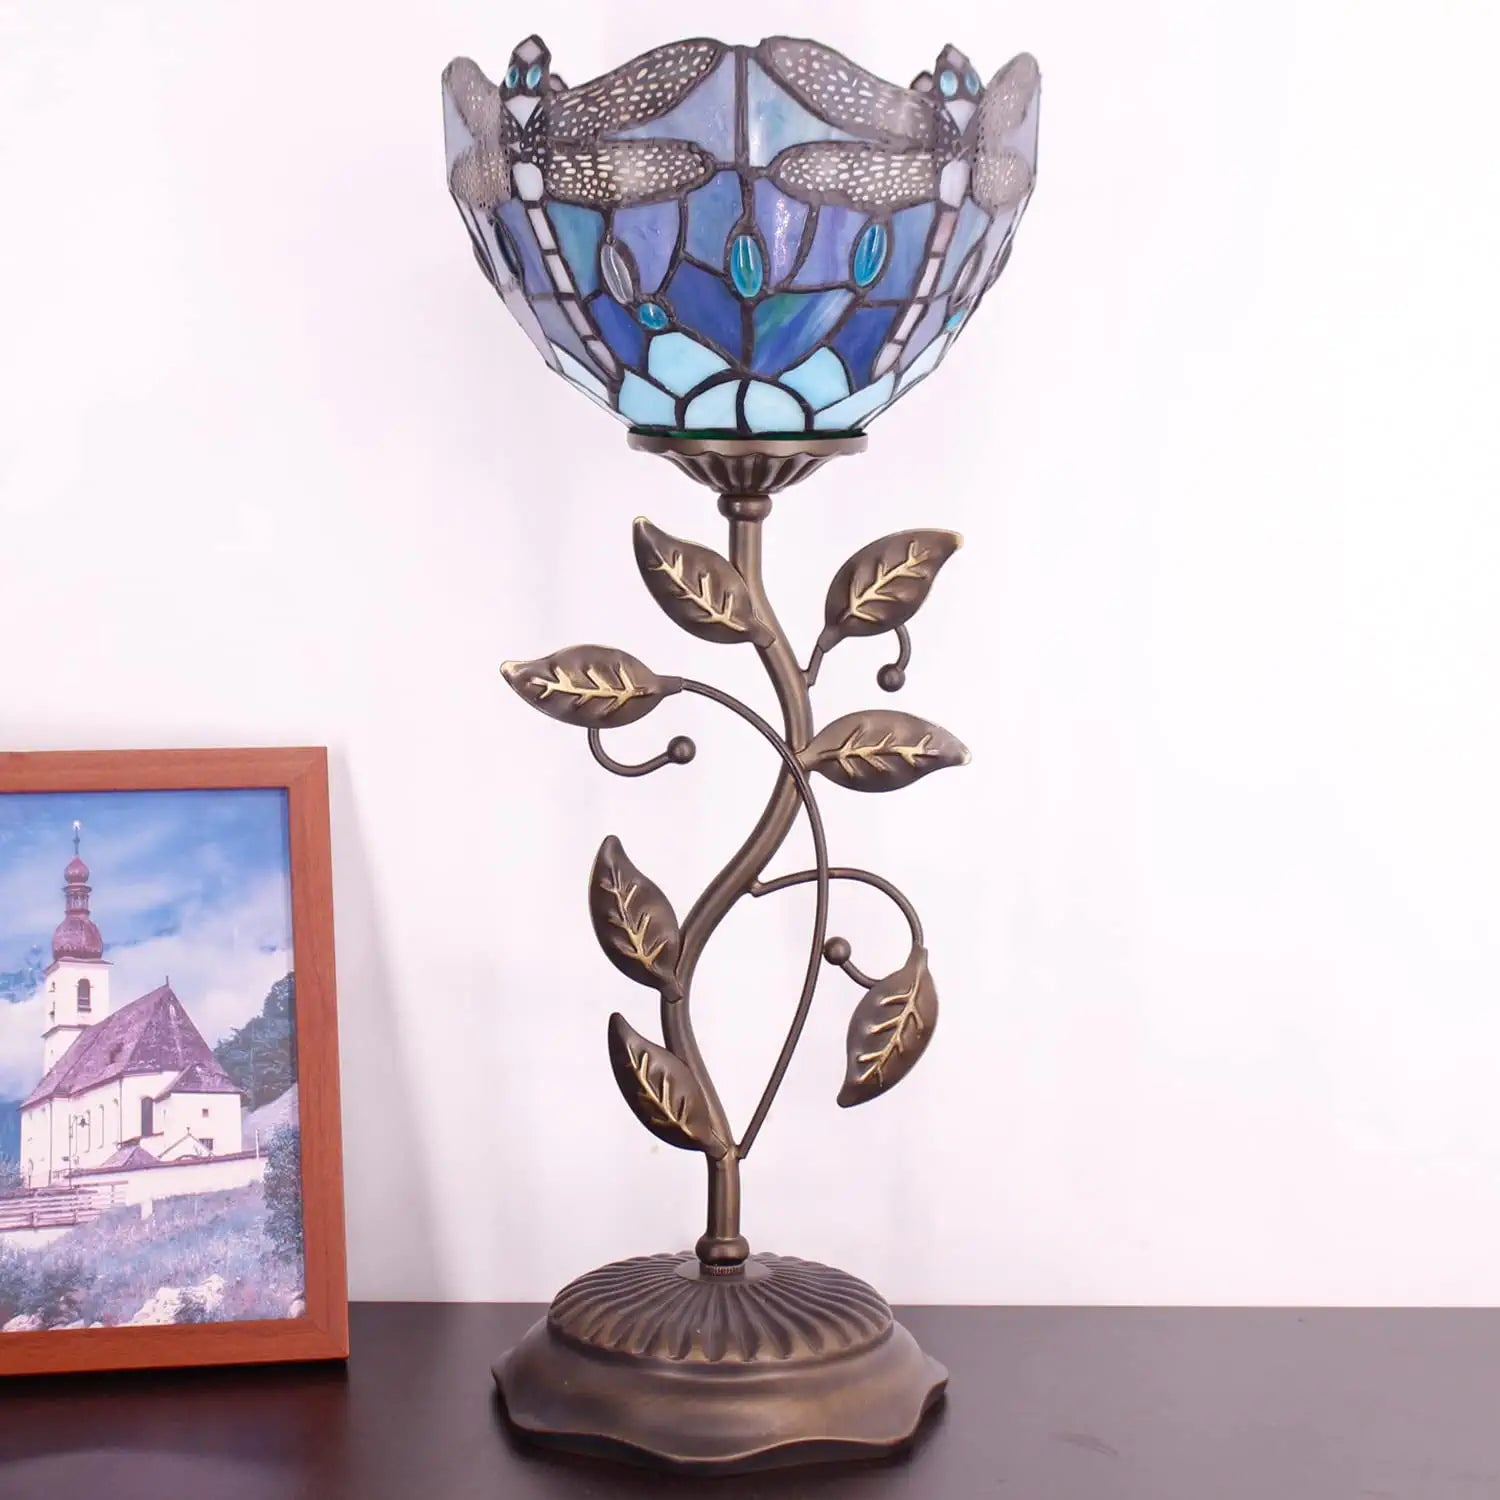 WERFACTORY Small Tiffany Table Lamp 8" Sea Blue Stained Glass Dragonfly Style Shade 19" Tall Antique Vintage Metal Leaf Base Mini Bedside Accent Desk Torchiere Uplight